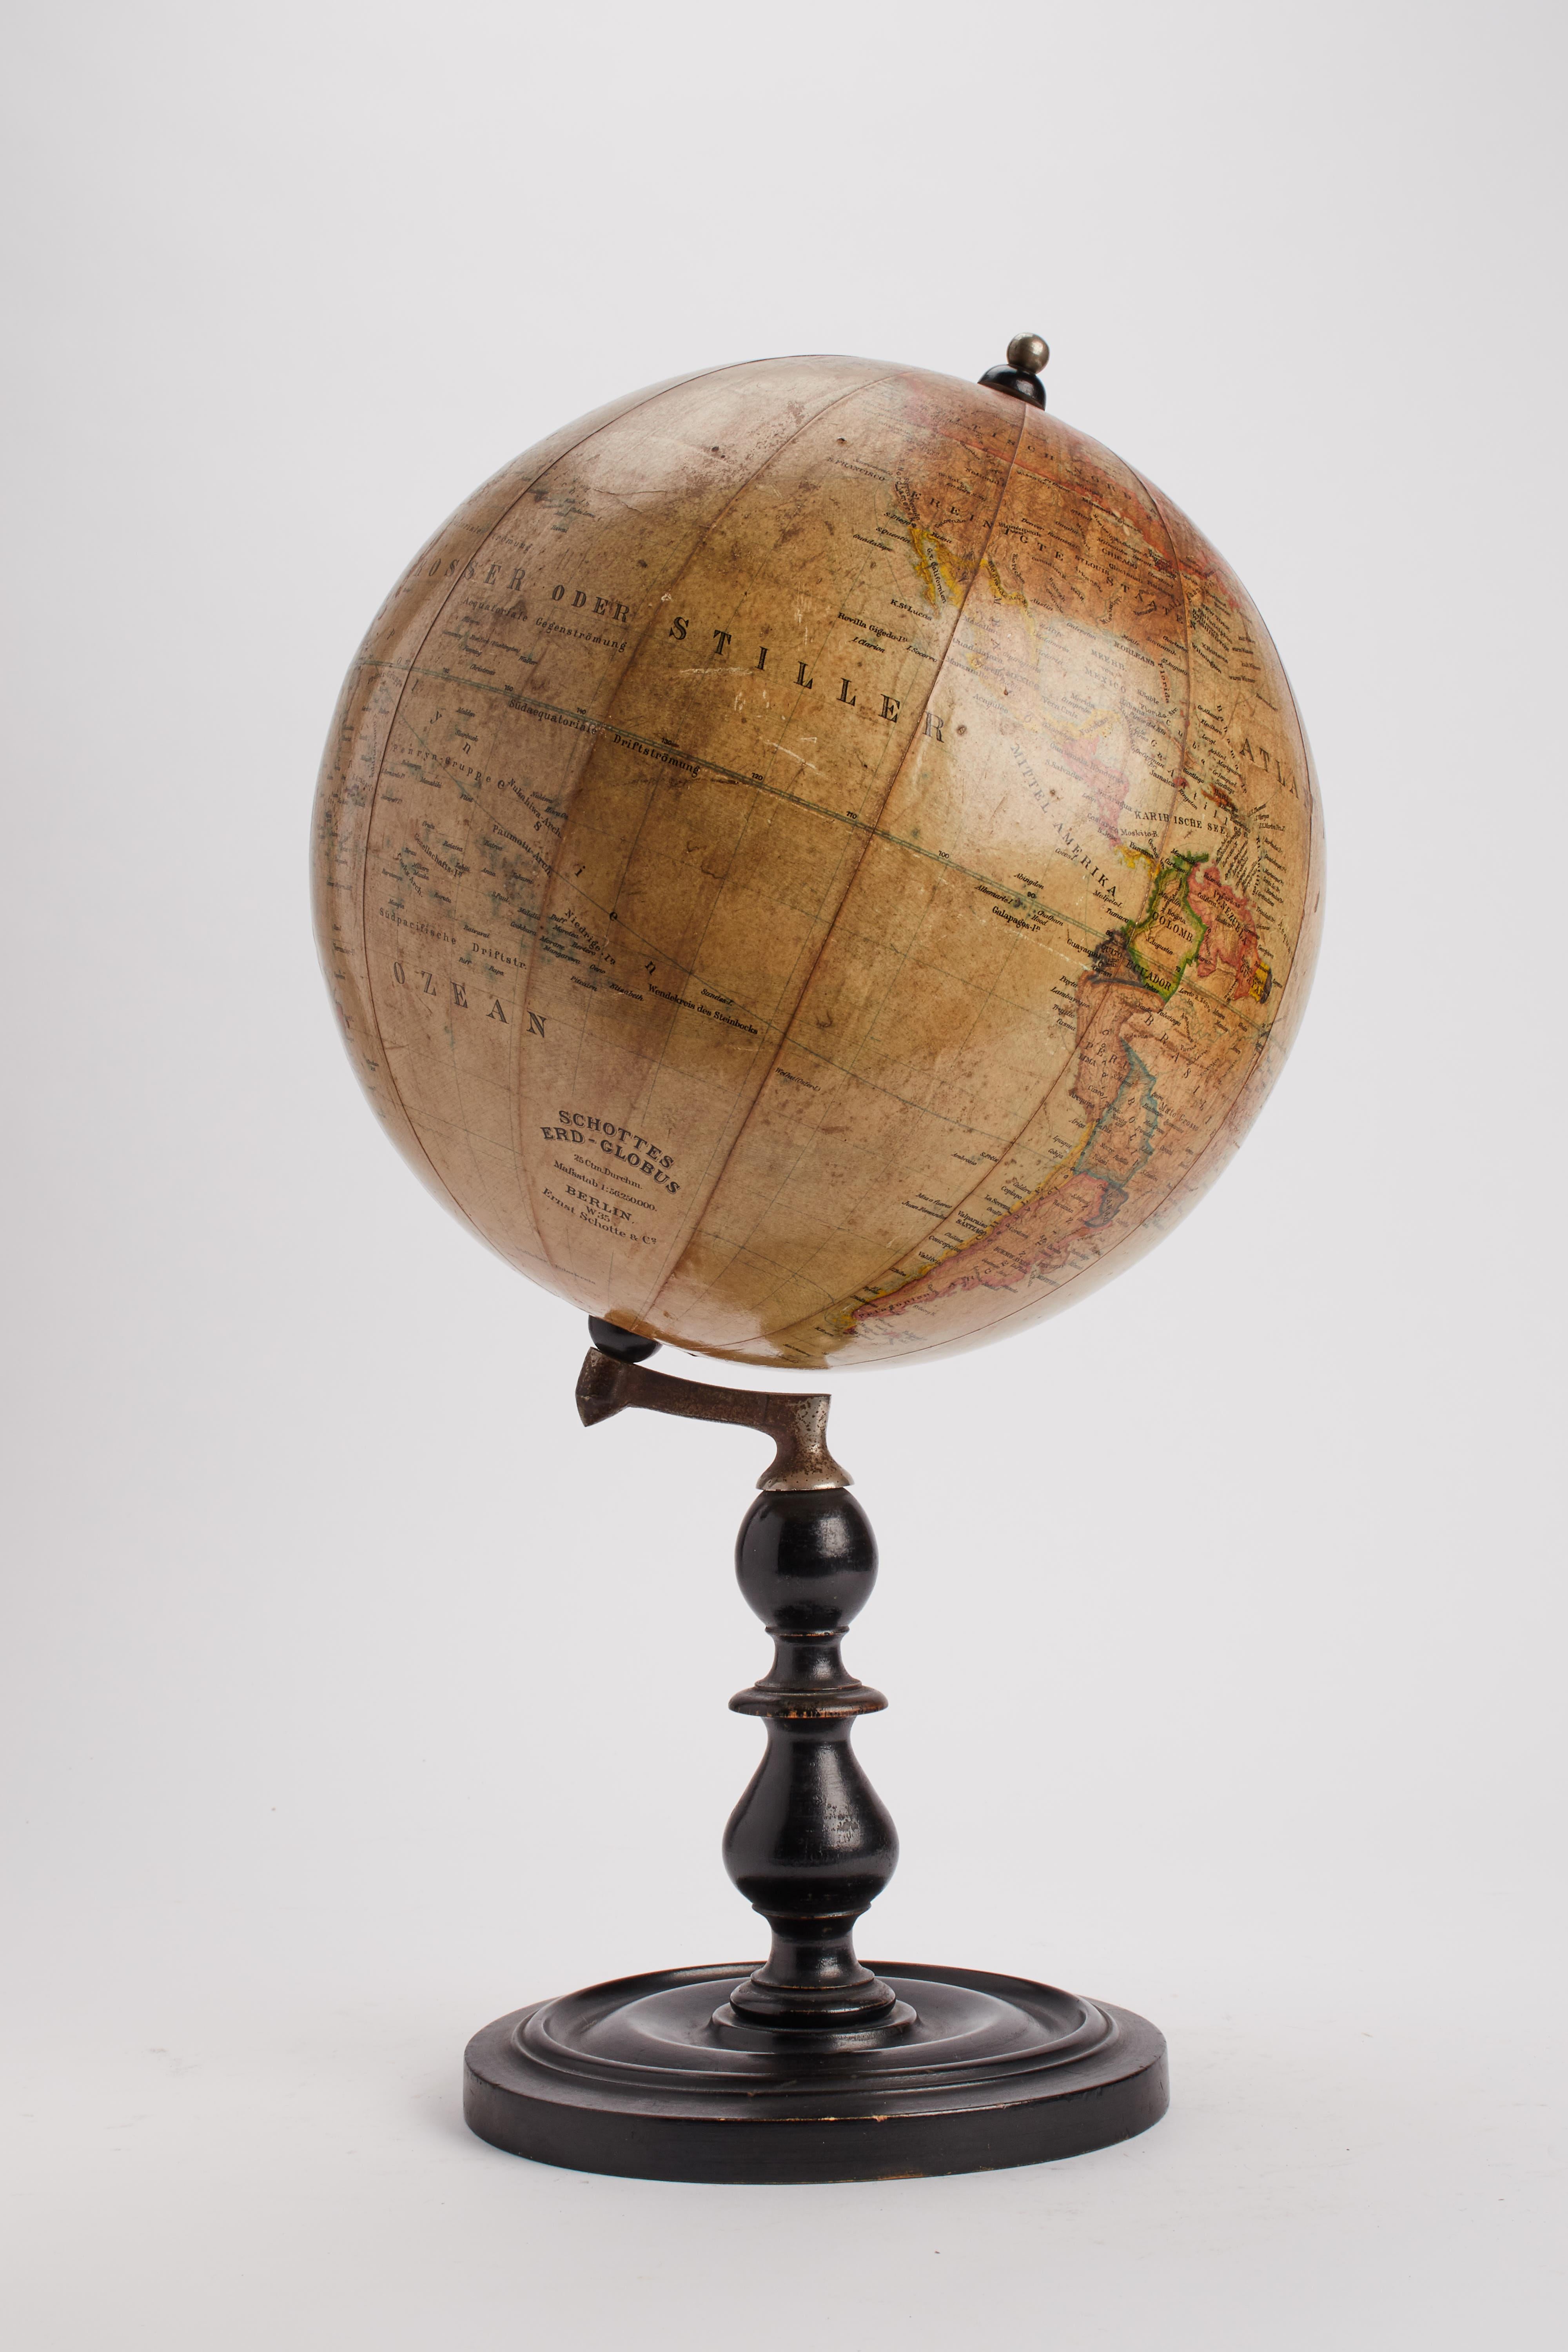 Terrestrial globe in watercolored paper, fixed with an inclined axis through a small brass arm, mounted on a black turned fruit wood base. Published by Ernst Schotte & Co. Berlin, Germany late 19th century.